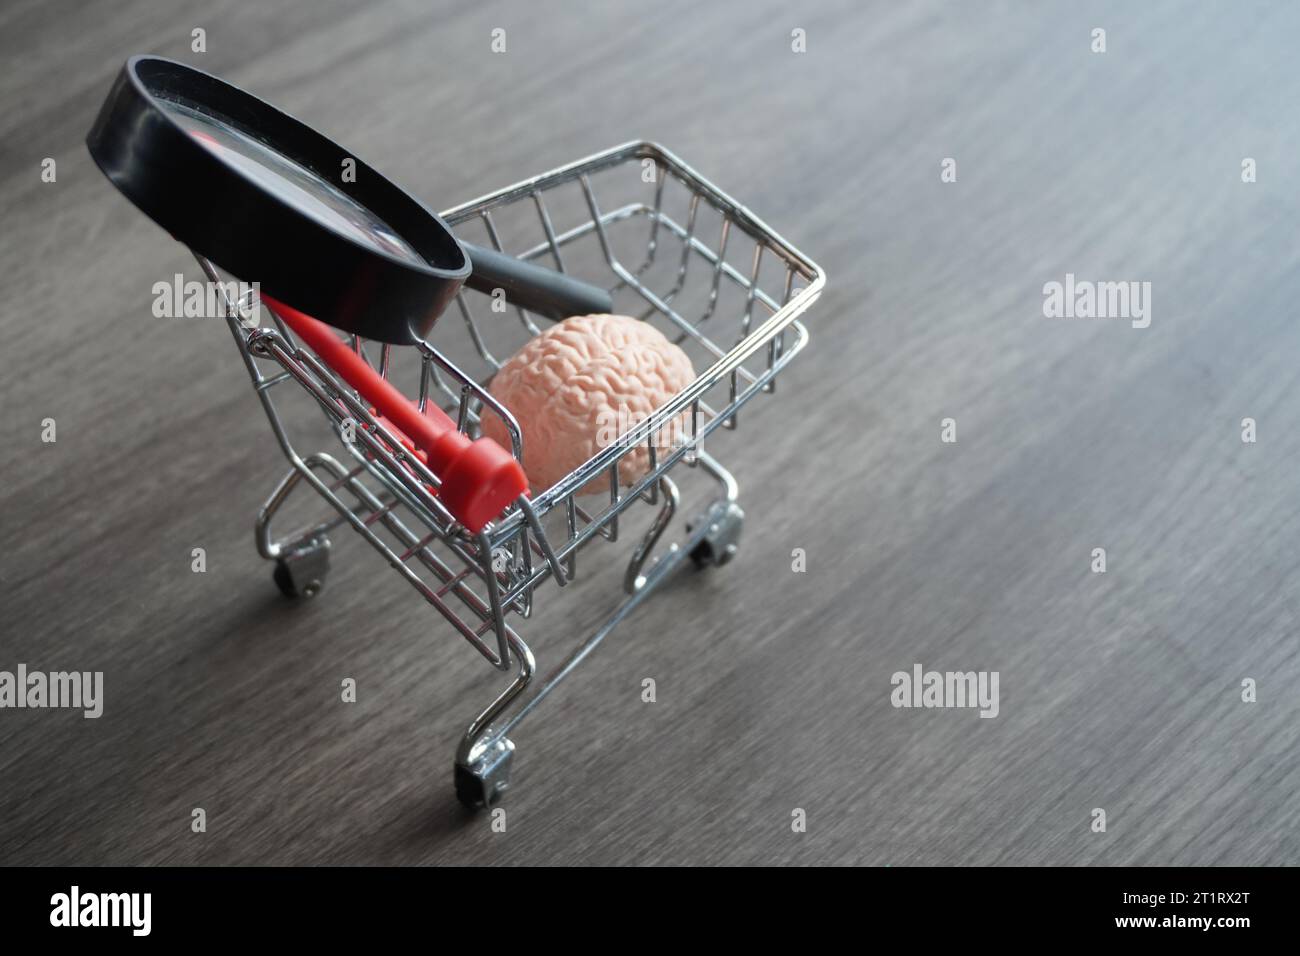 A human brain and magnifying glass inside shopping carts. Consumer behavior analysis and market research concept. Stock Photo